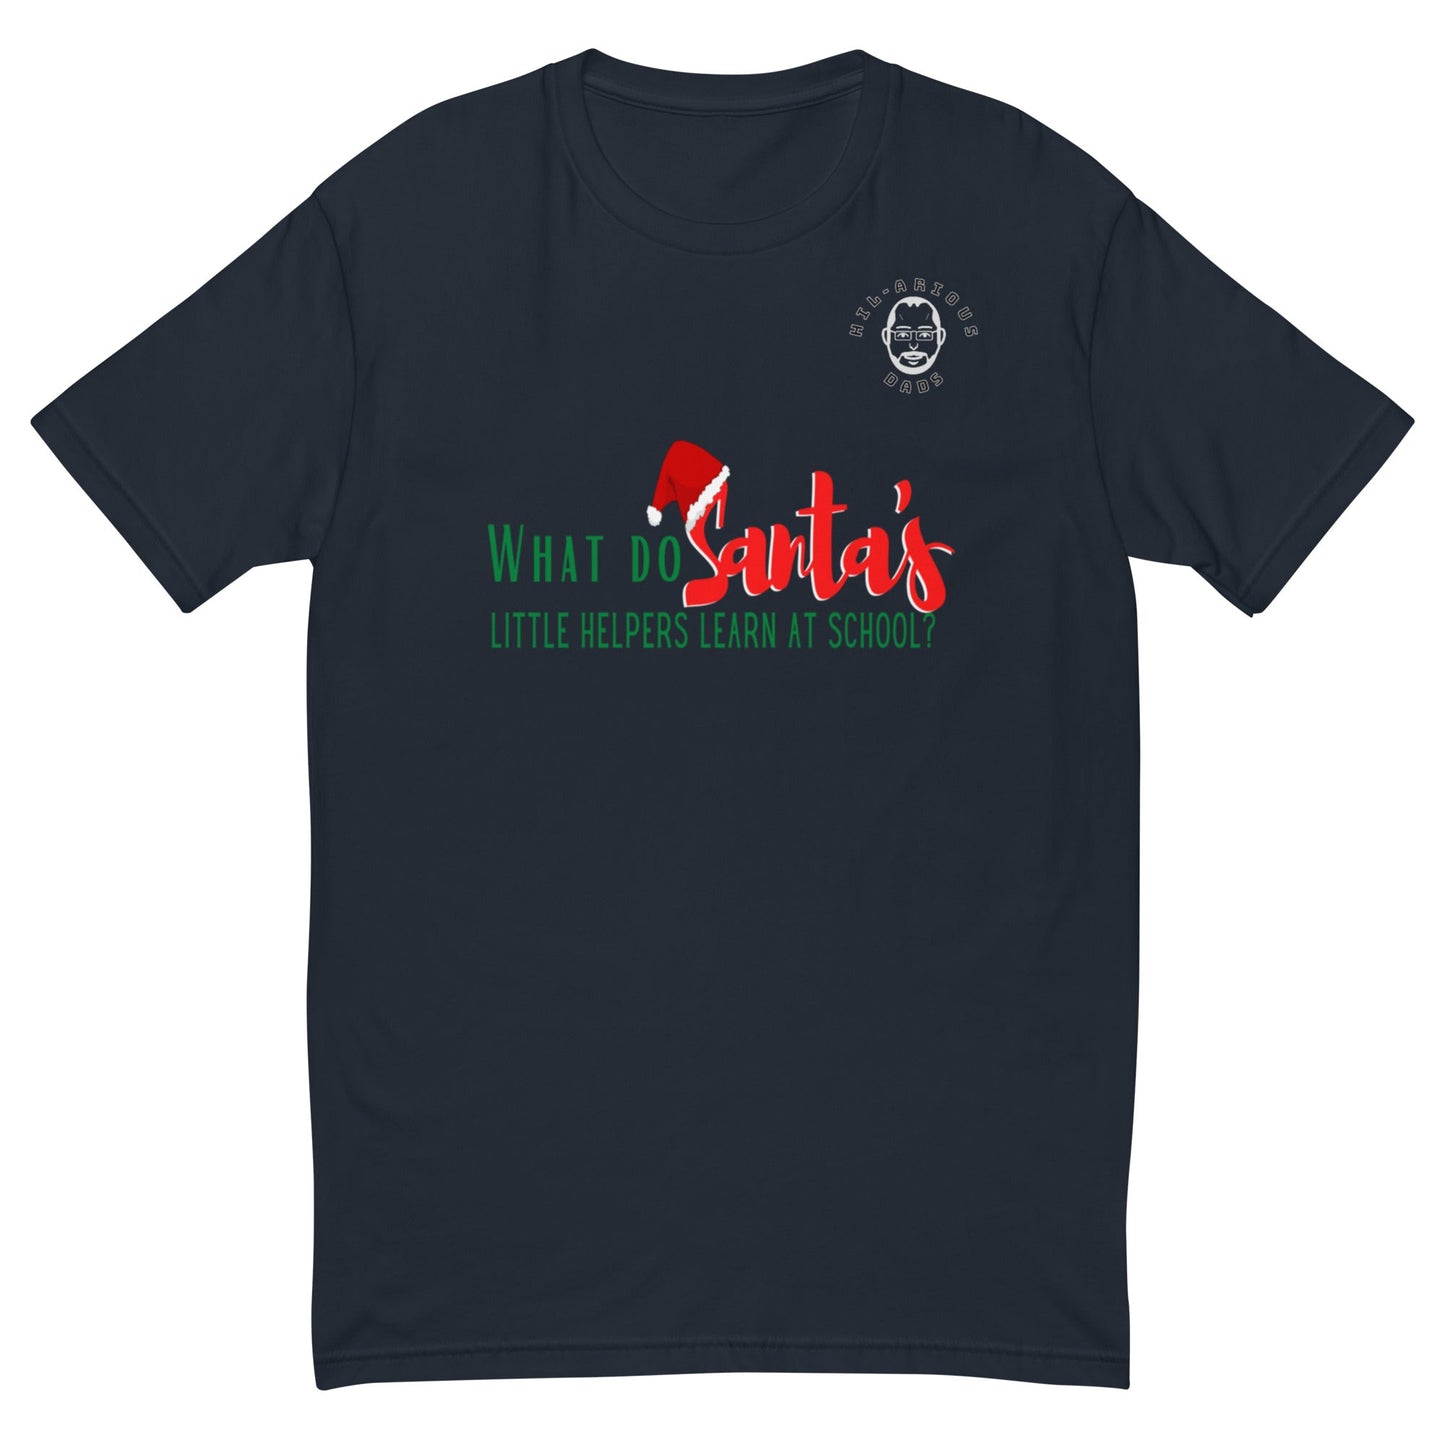 What do Santa’s little helpers learn at school?-T-shirt - Hil-arious Dads